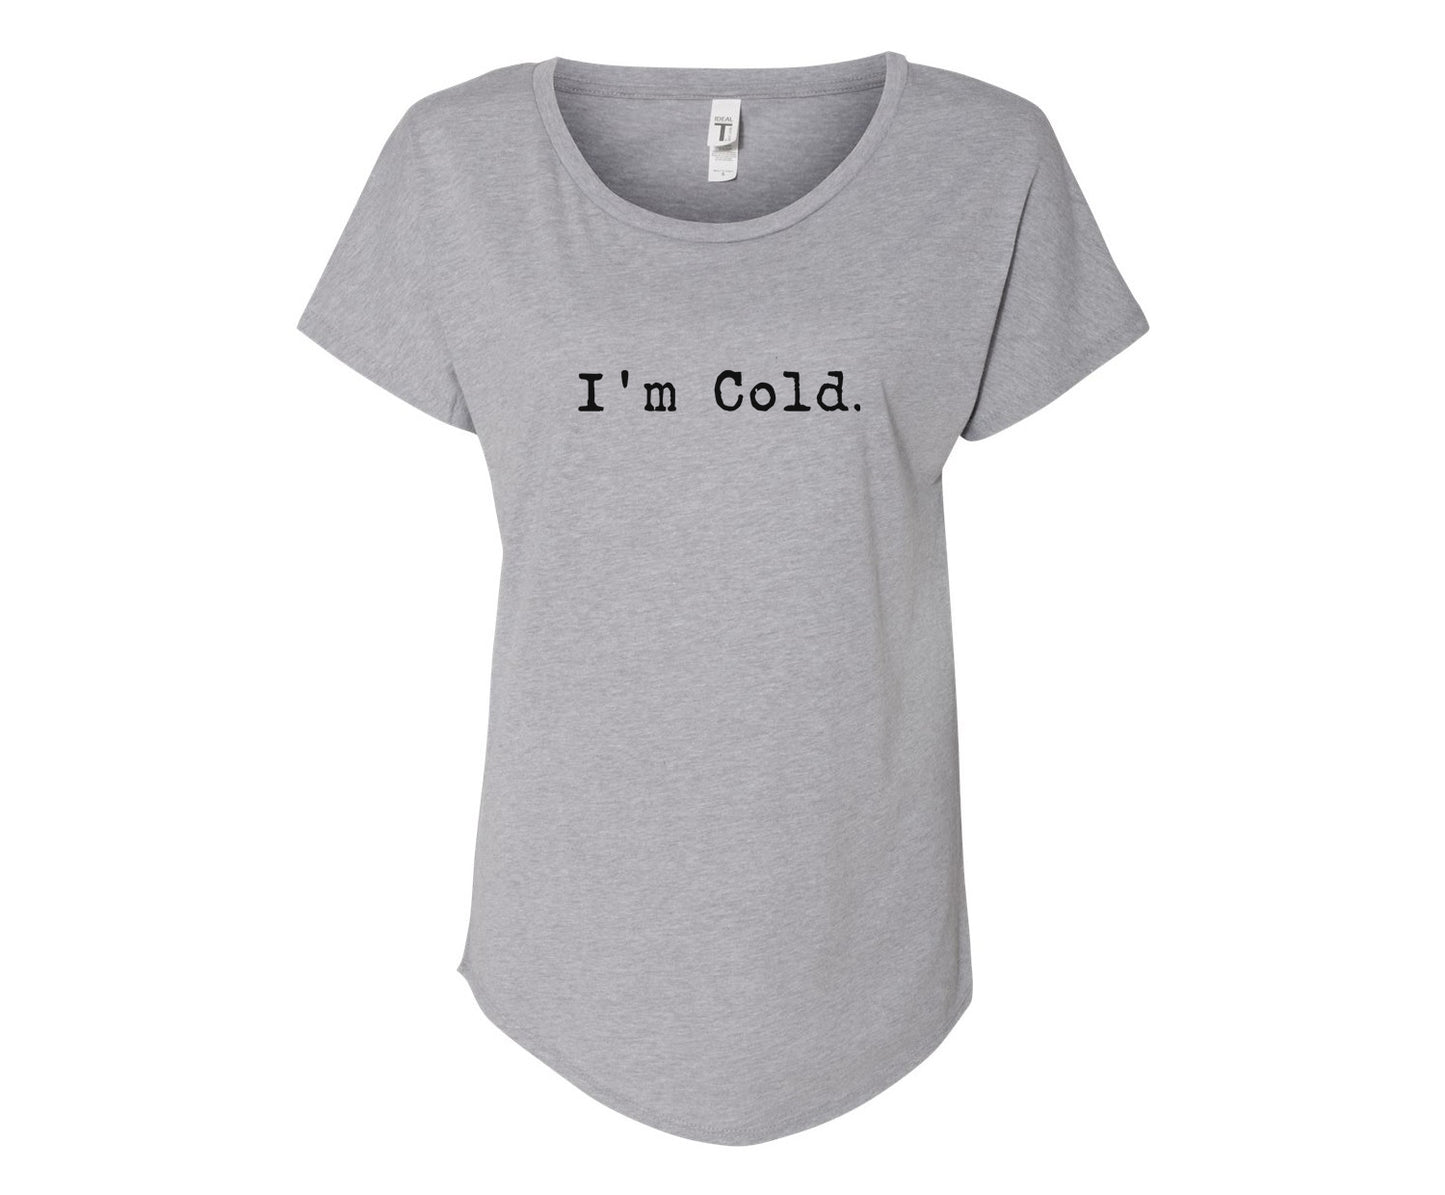 I'm Cold Ladies Tee Shirt - In Grey & White